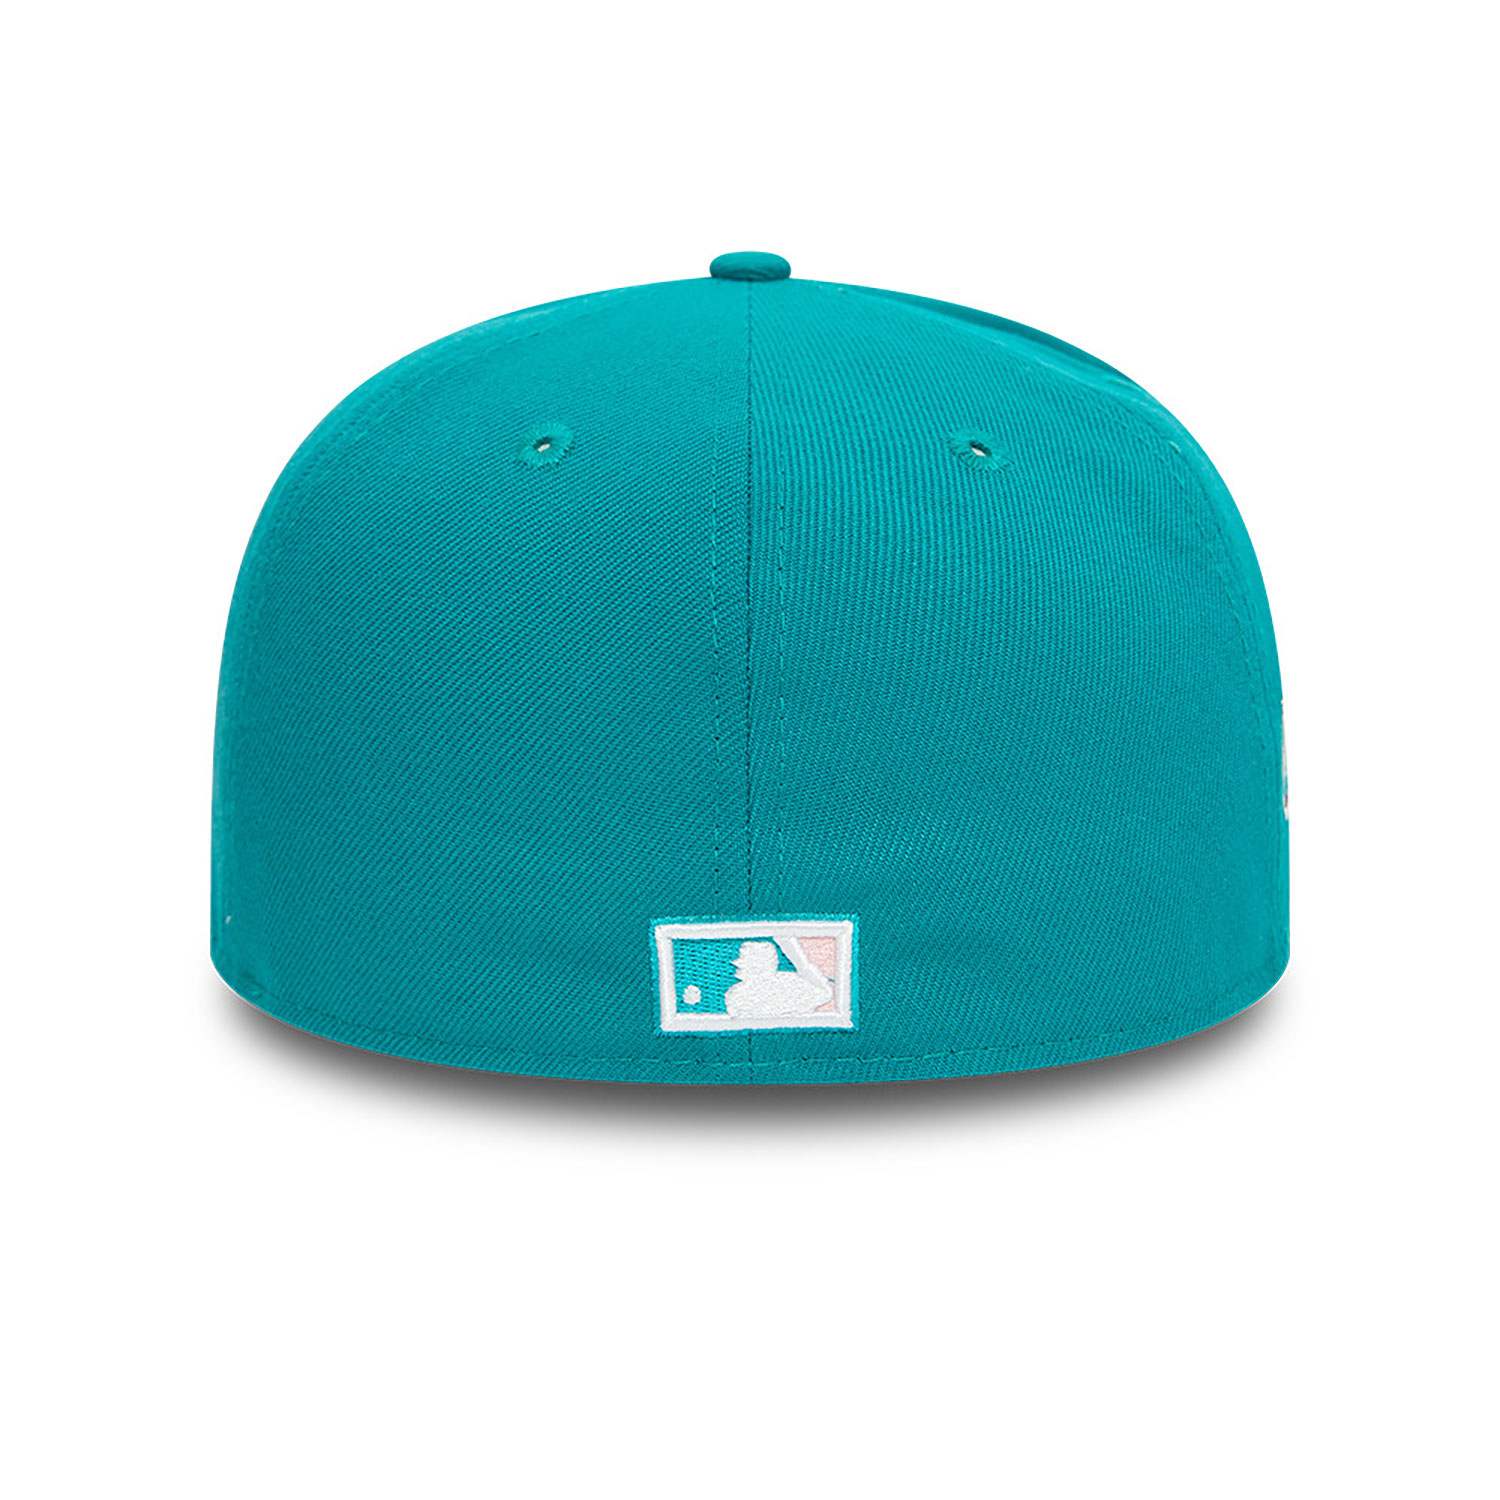 Seattle Mariners MLB Off Season Turquoise 59FIFTY Fitted Cap